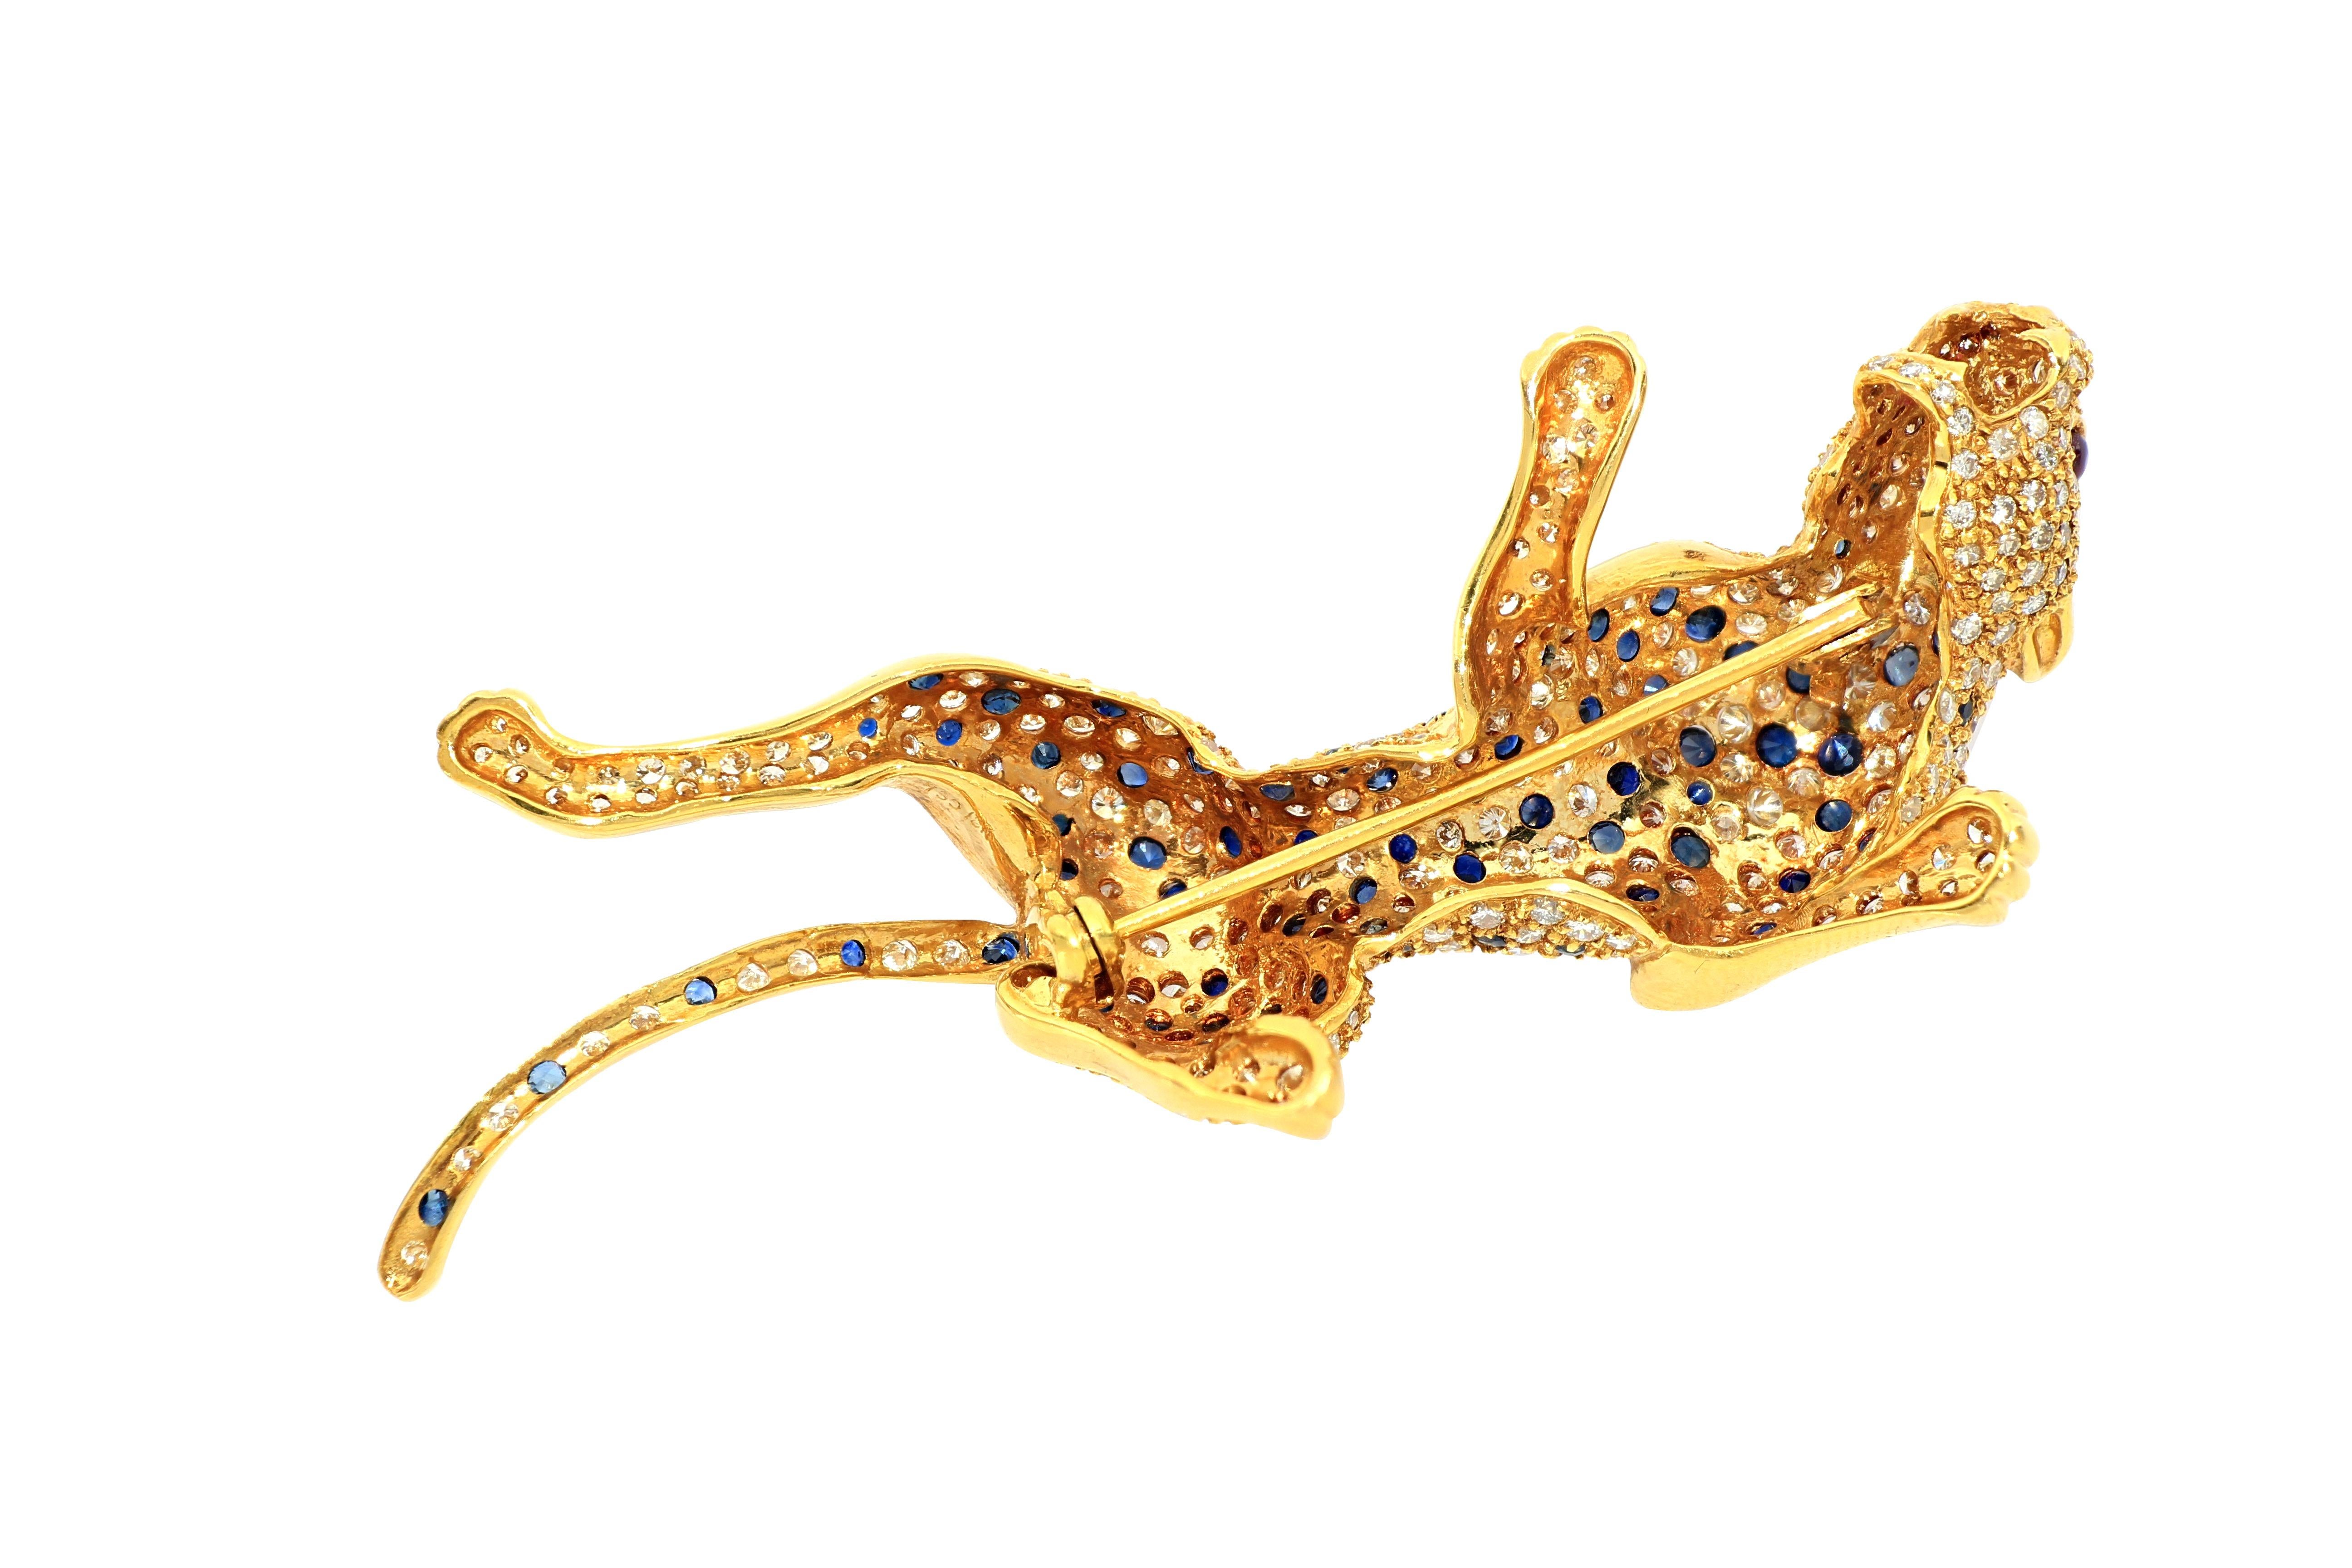 Women's or Men's 18K Gold Diamond Panther Brooch with Sapphires and Rubies  For Sale